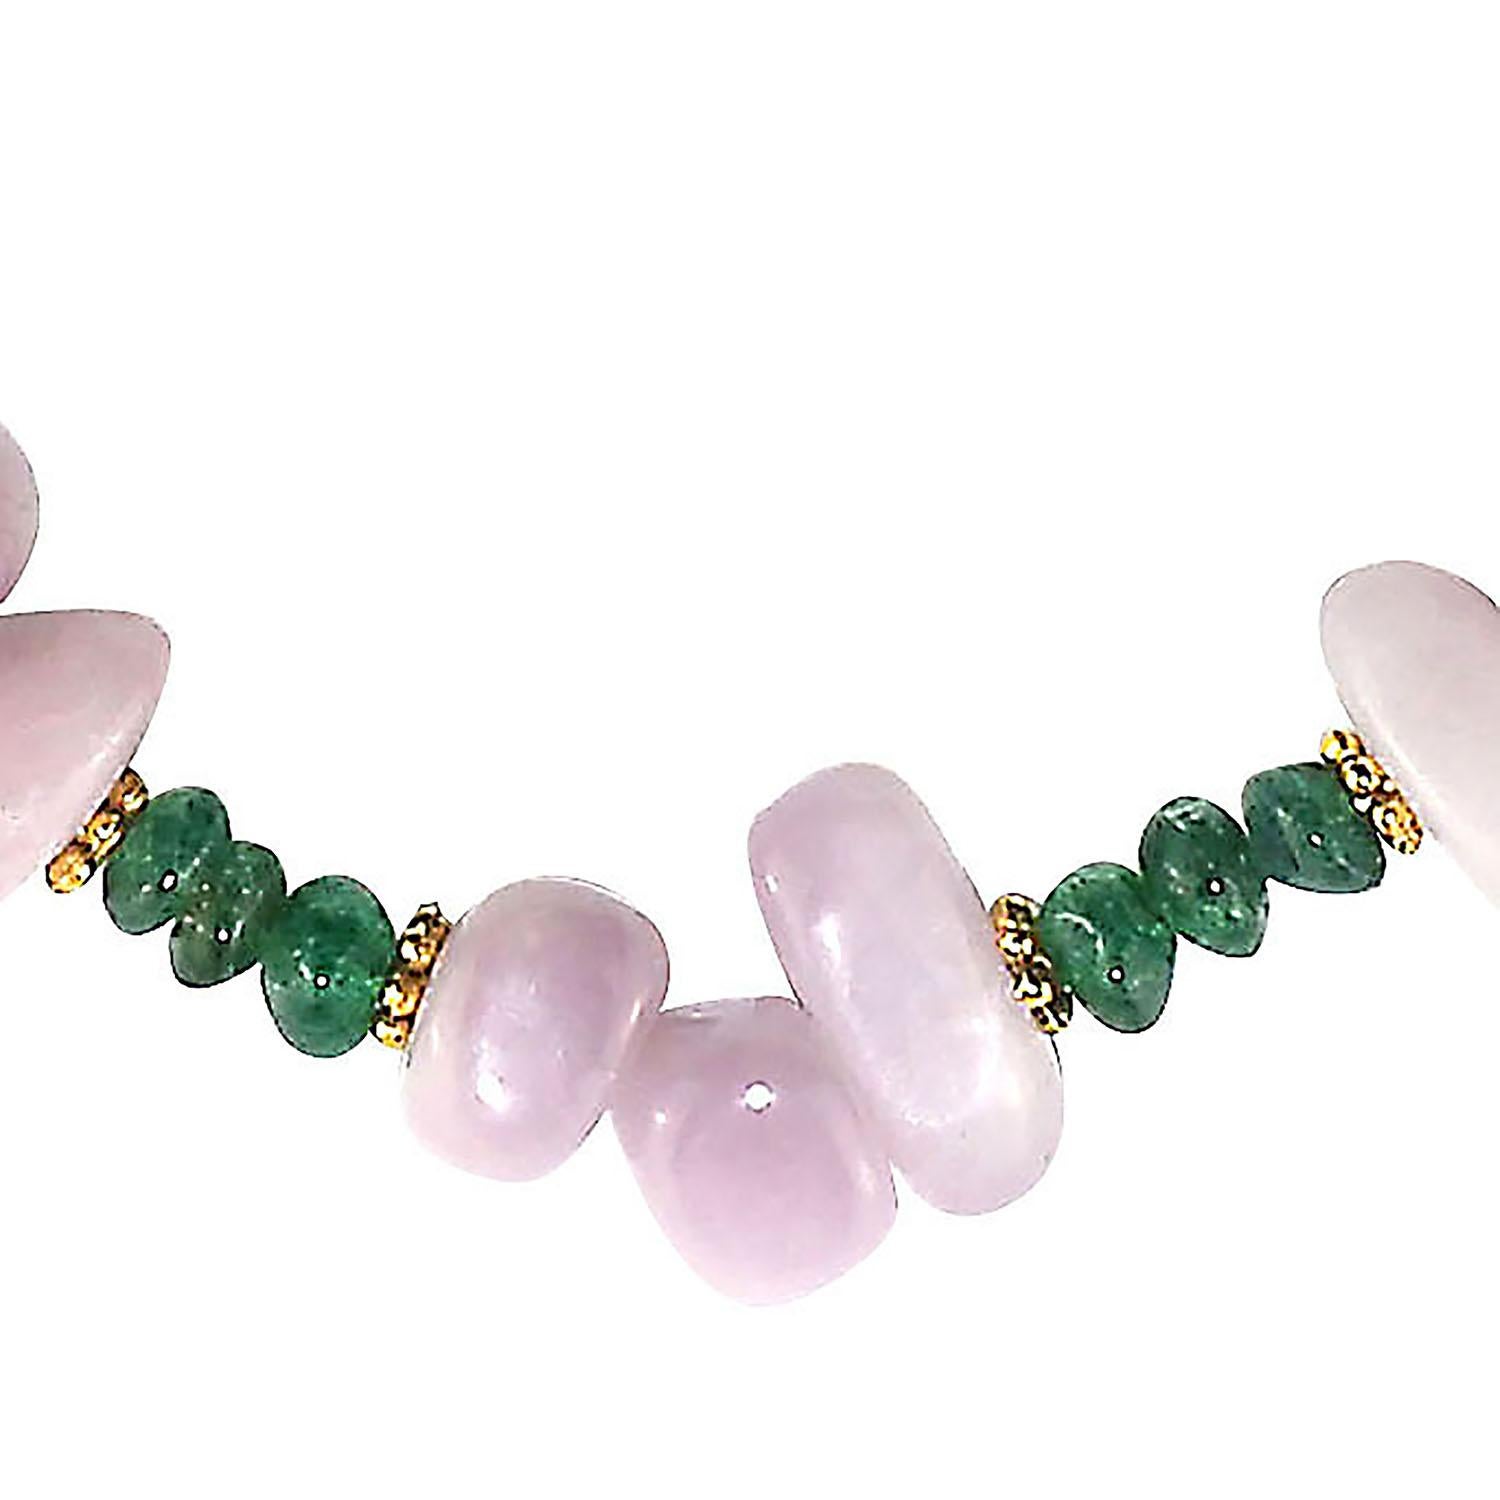 Artisan AJD Glowing Kunzite and Aventurine Necklace for Summer Fun For Sale